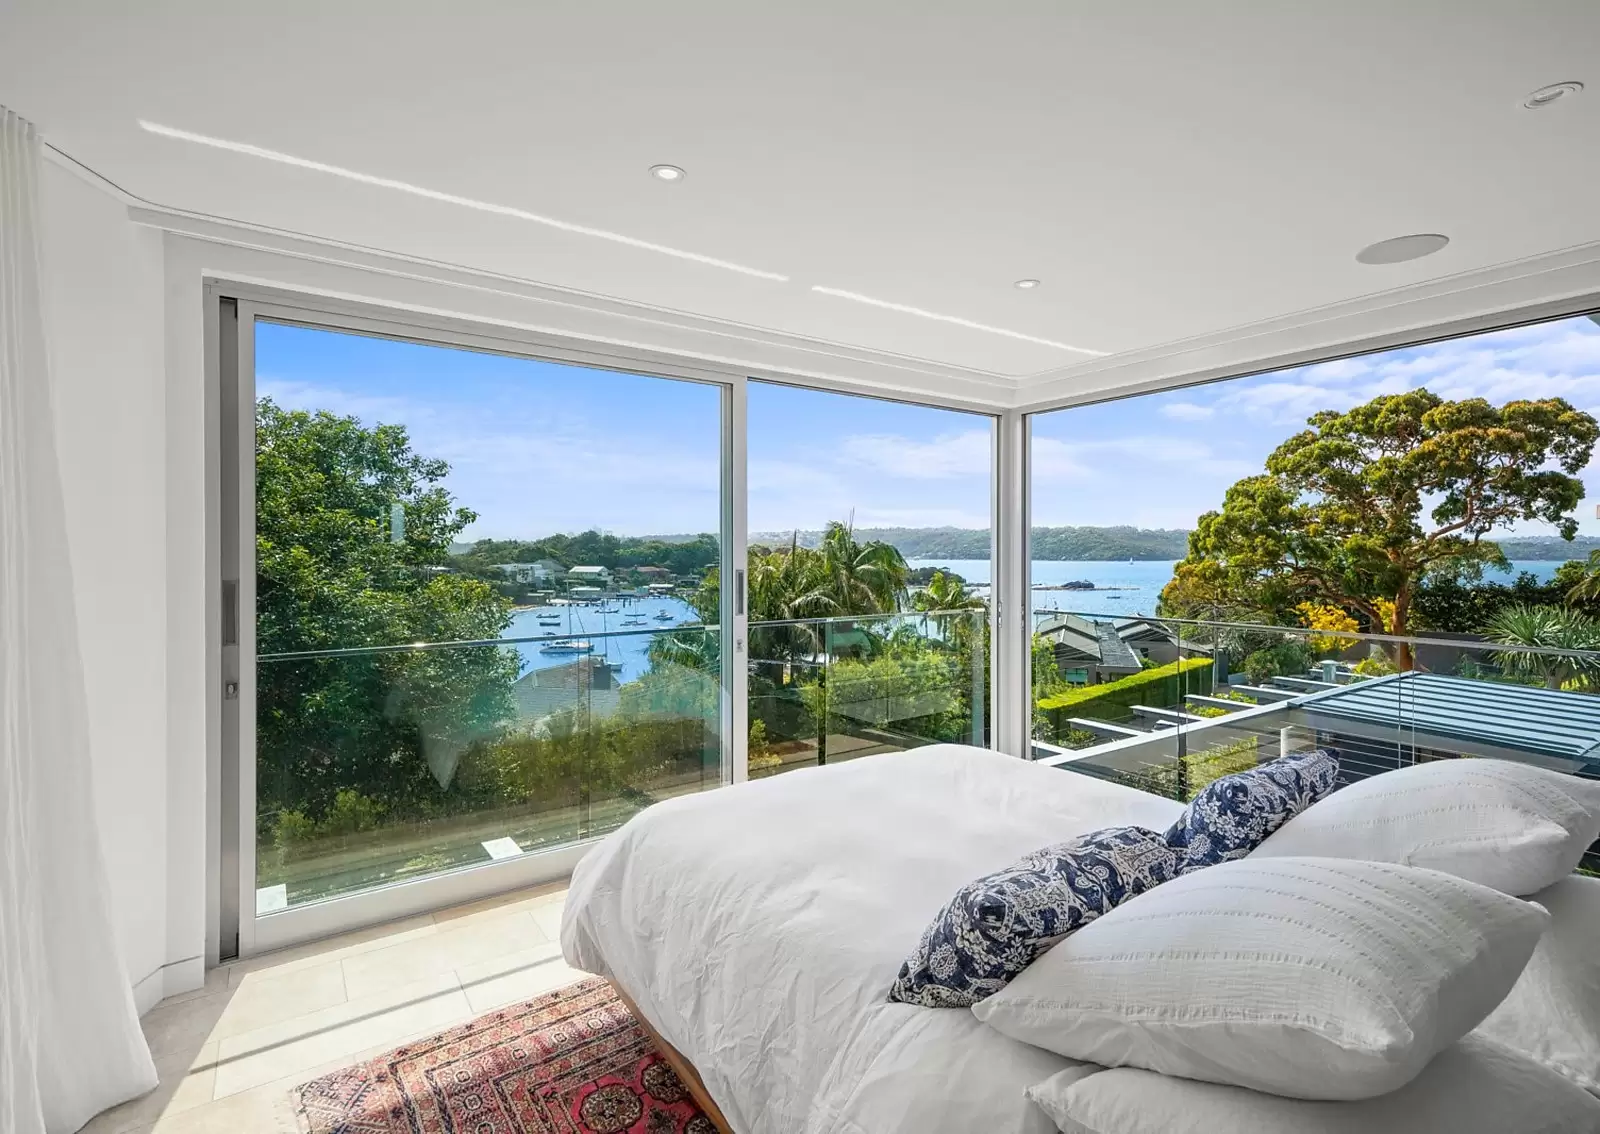 Photo #16: 97 Wentworth Road, Vaucluse - For Sale by Sydney Sotheby's International Realty